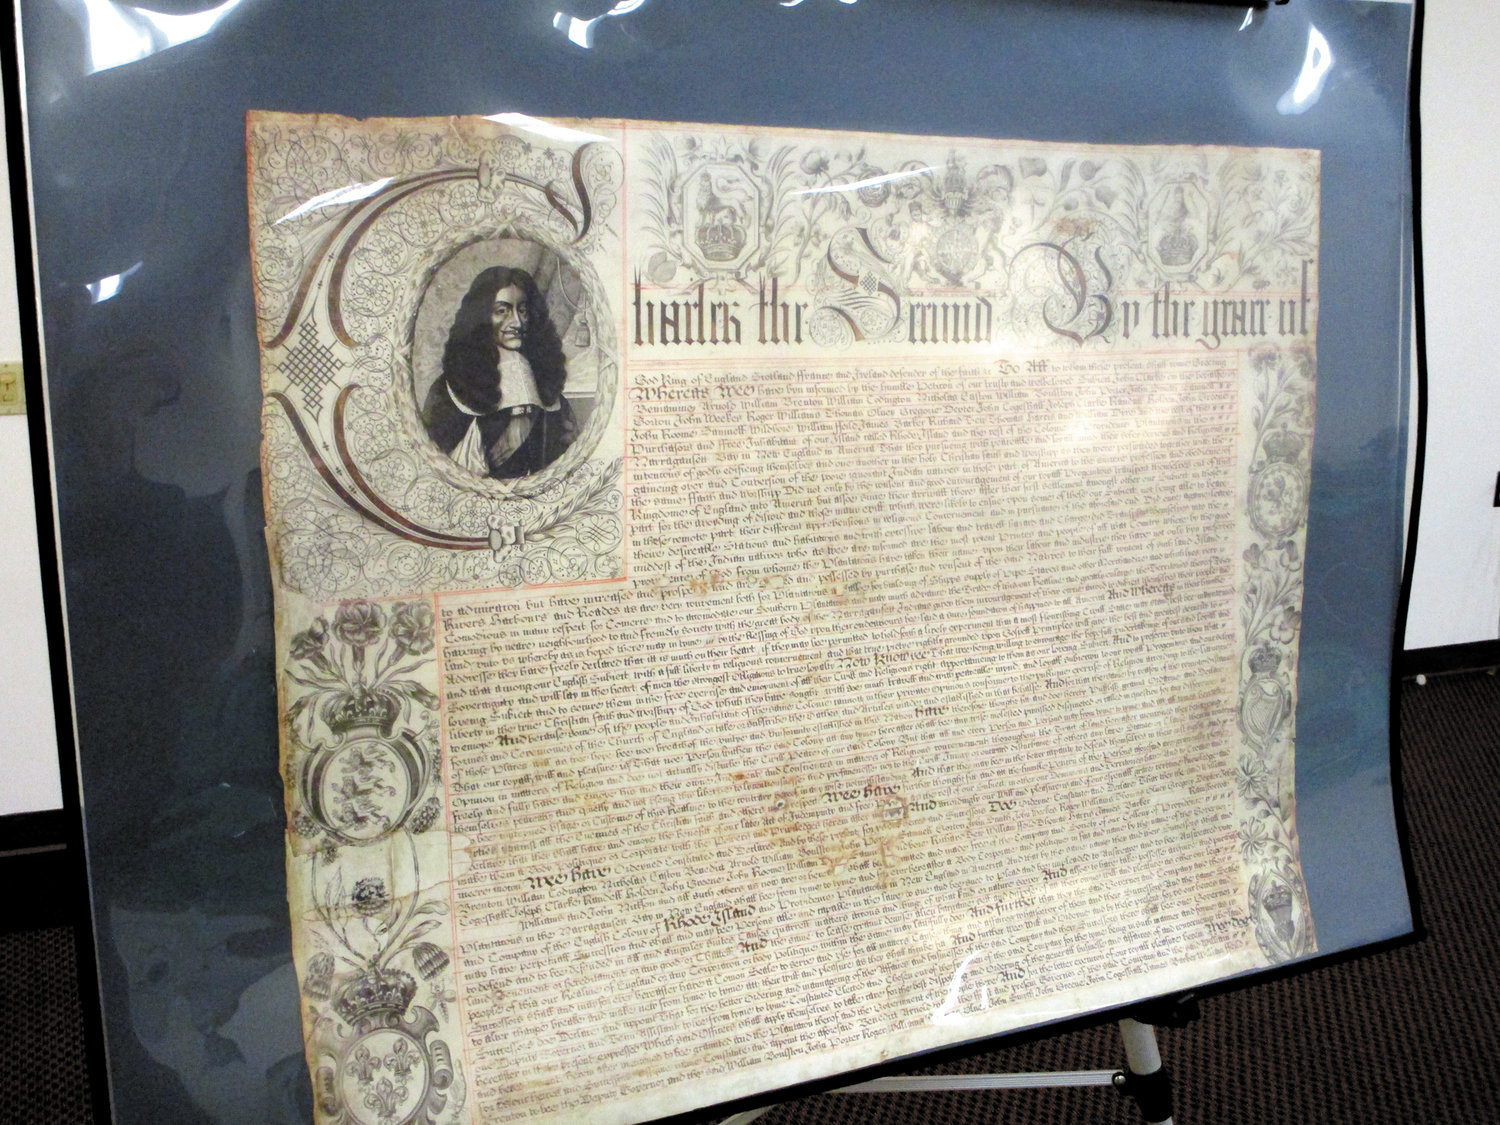 A copy of Rhode Island’s royal charter is part of the display at Cranston Public Library’s Central Library.